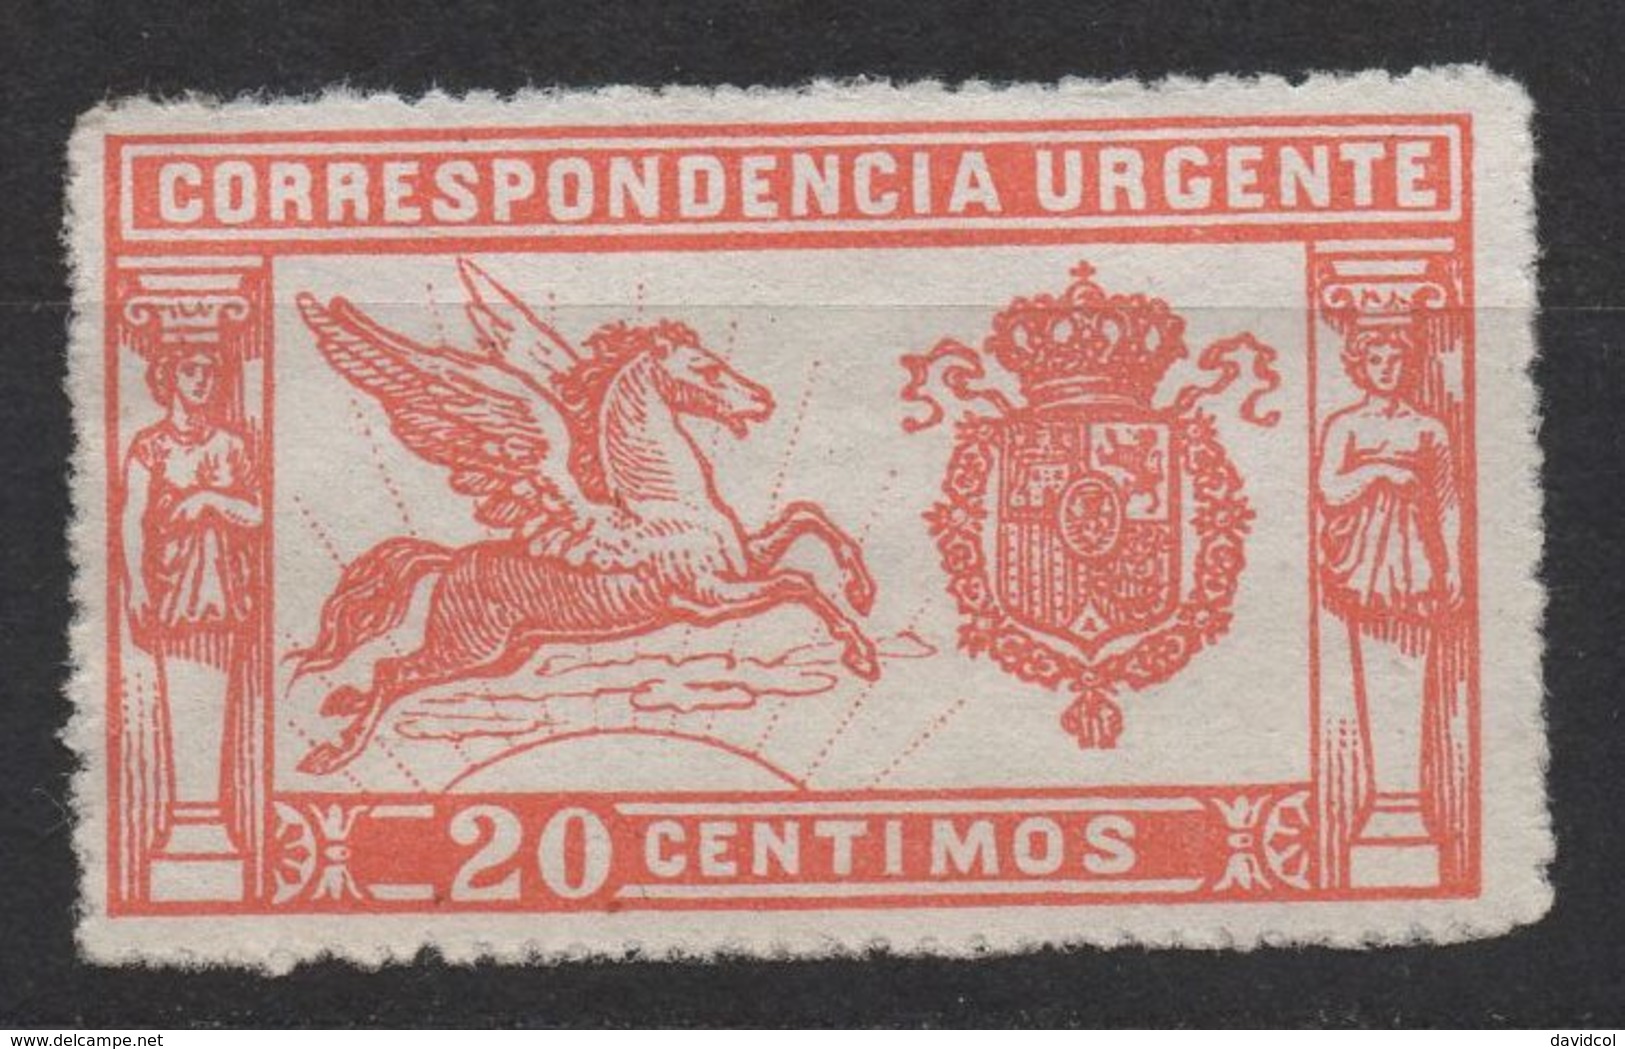 Q642.-. SPAIN - 1905 .-. SC#: E1 . MNG .  PEGASUS - SPECIAL DELIVERY STAMP - SCV:US$ 45.00 - Exprès